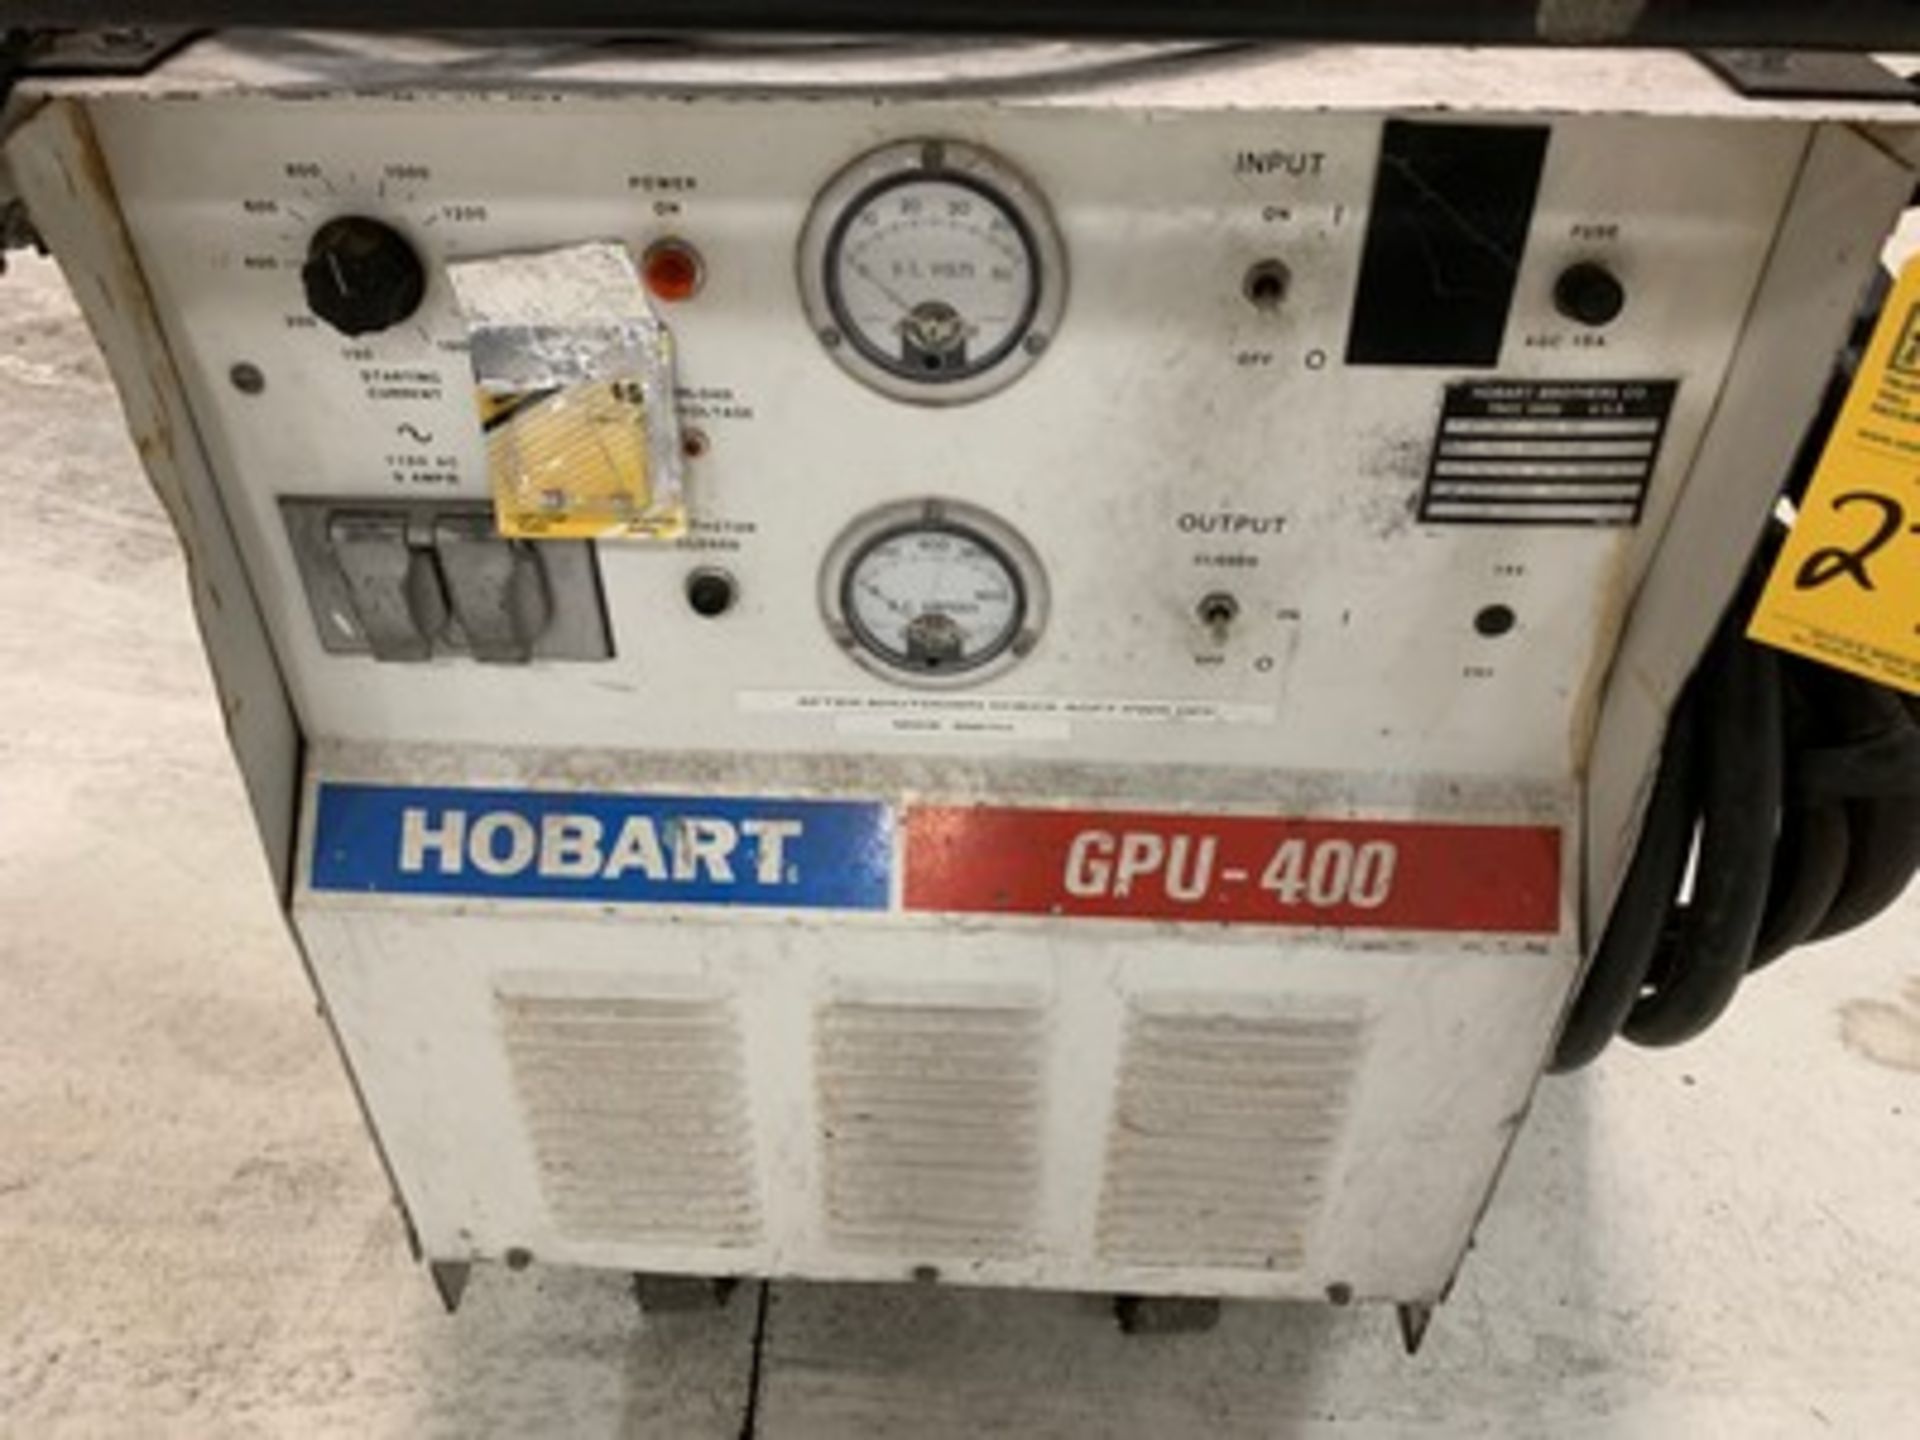 HOBART GPU-400 6T28-400CL SOLID STAT GROUND POWER UNIT - Image 2 of 4